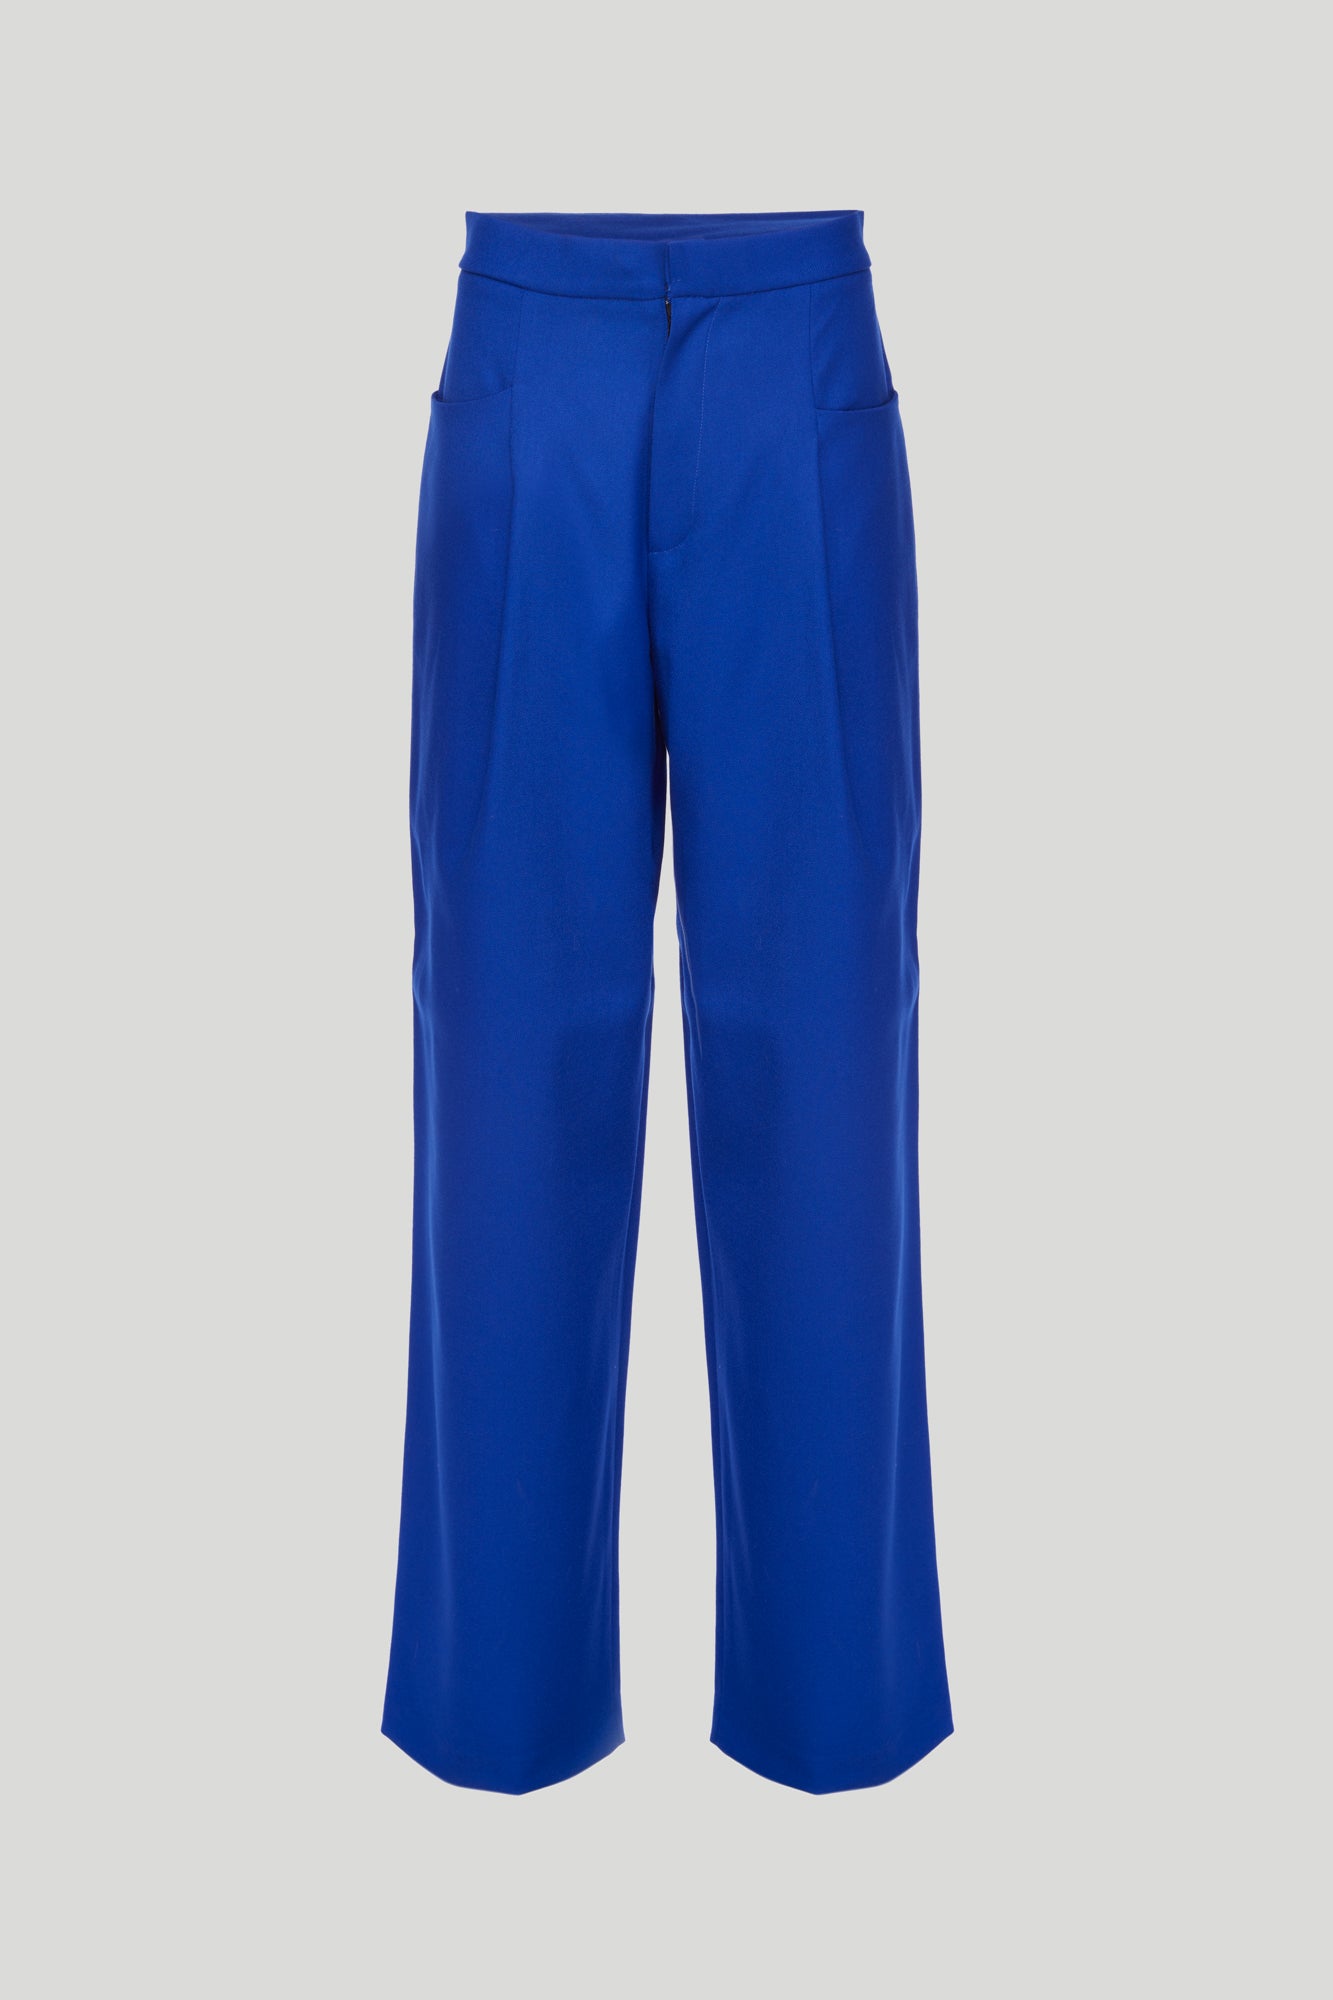 NINEMINUTES The Crew Wool Blue Trousers